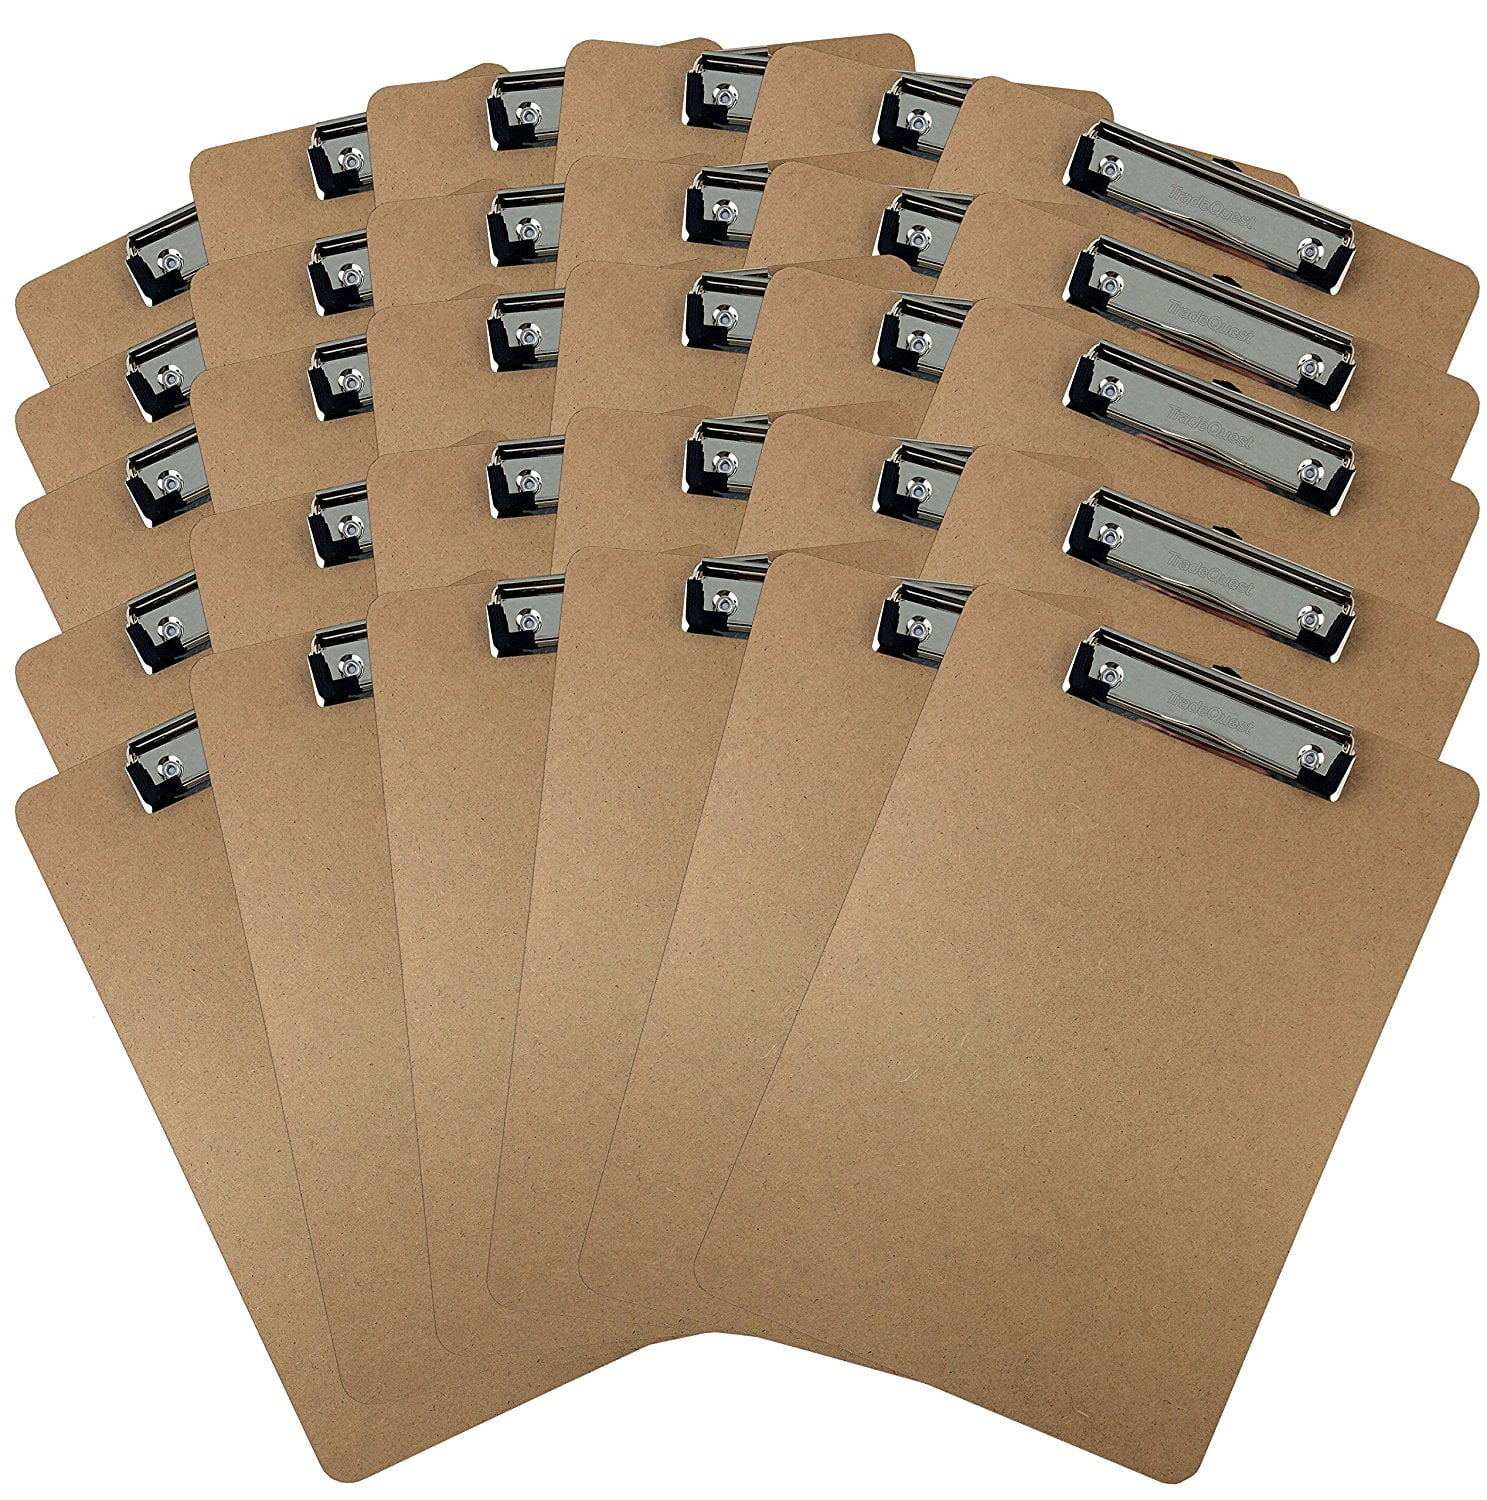 Trade Quest Letter Size Clipboard Low Profile Clip Hardboard Single Pack of 1 